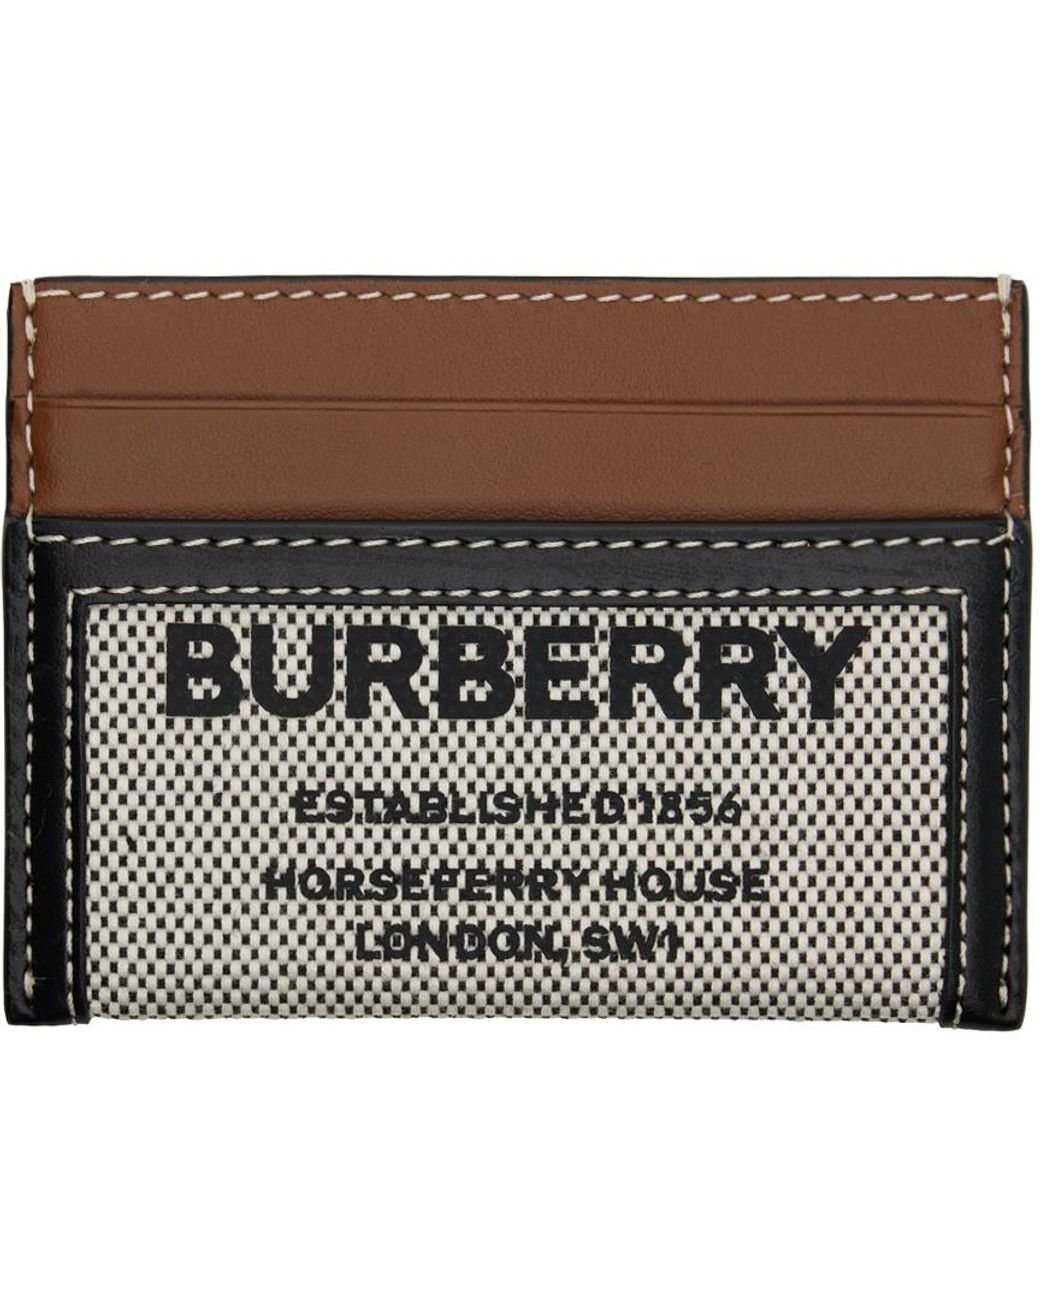 Burberry Horseferry Print Card Case with Detachable Strap